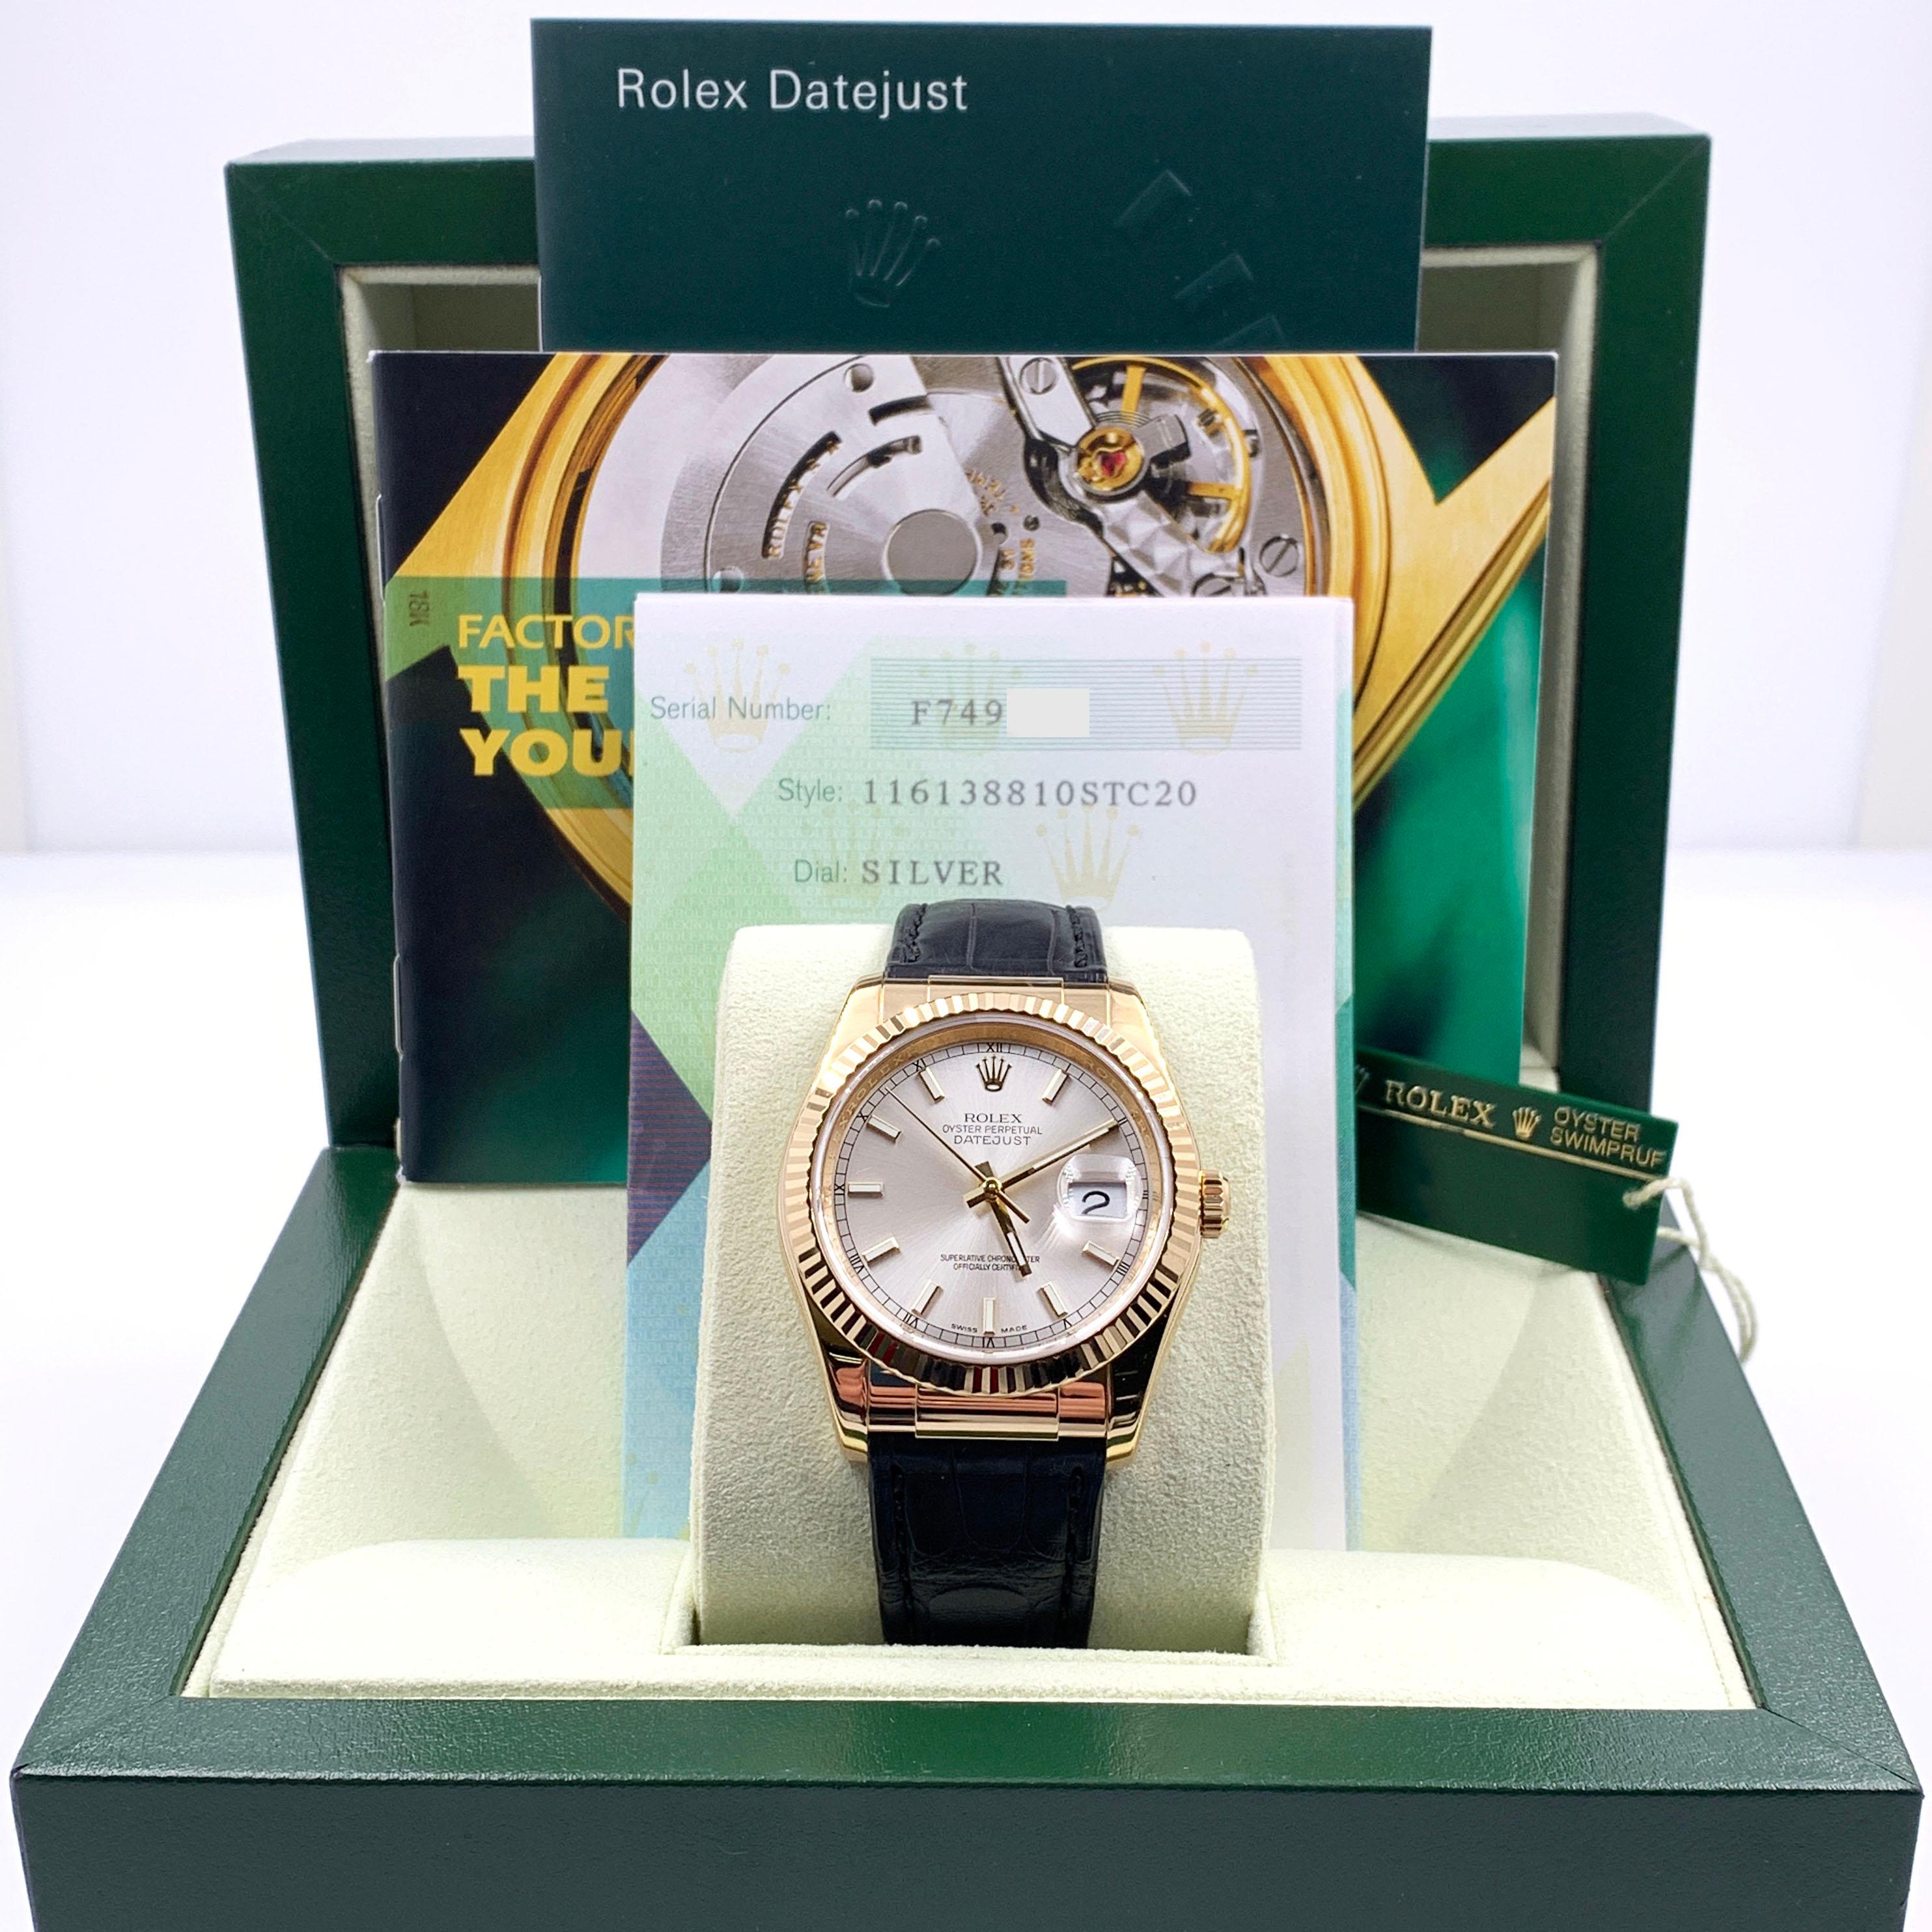 Rolex Datejust 116138 Silver Dial 18 Karat Yellow Gold Box Papers 4